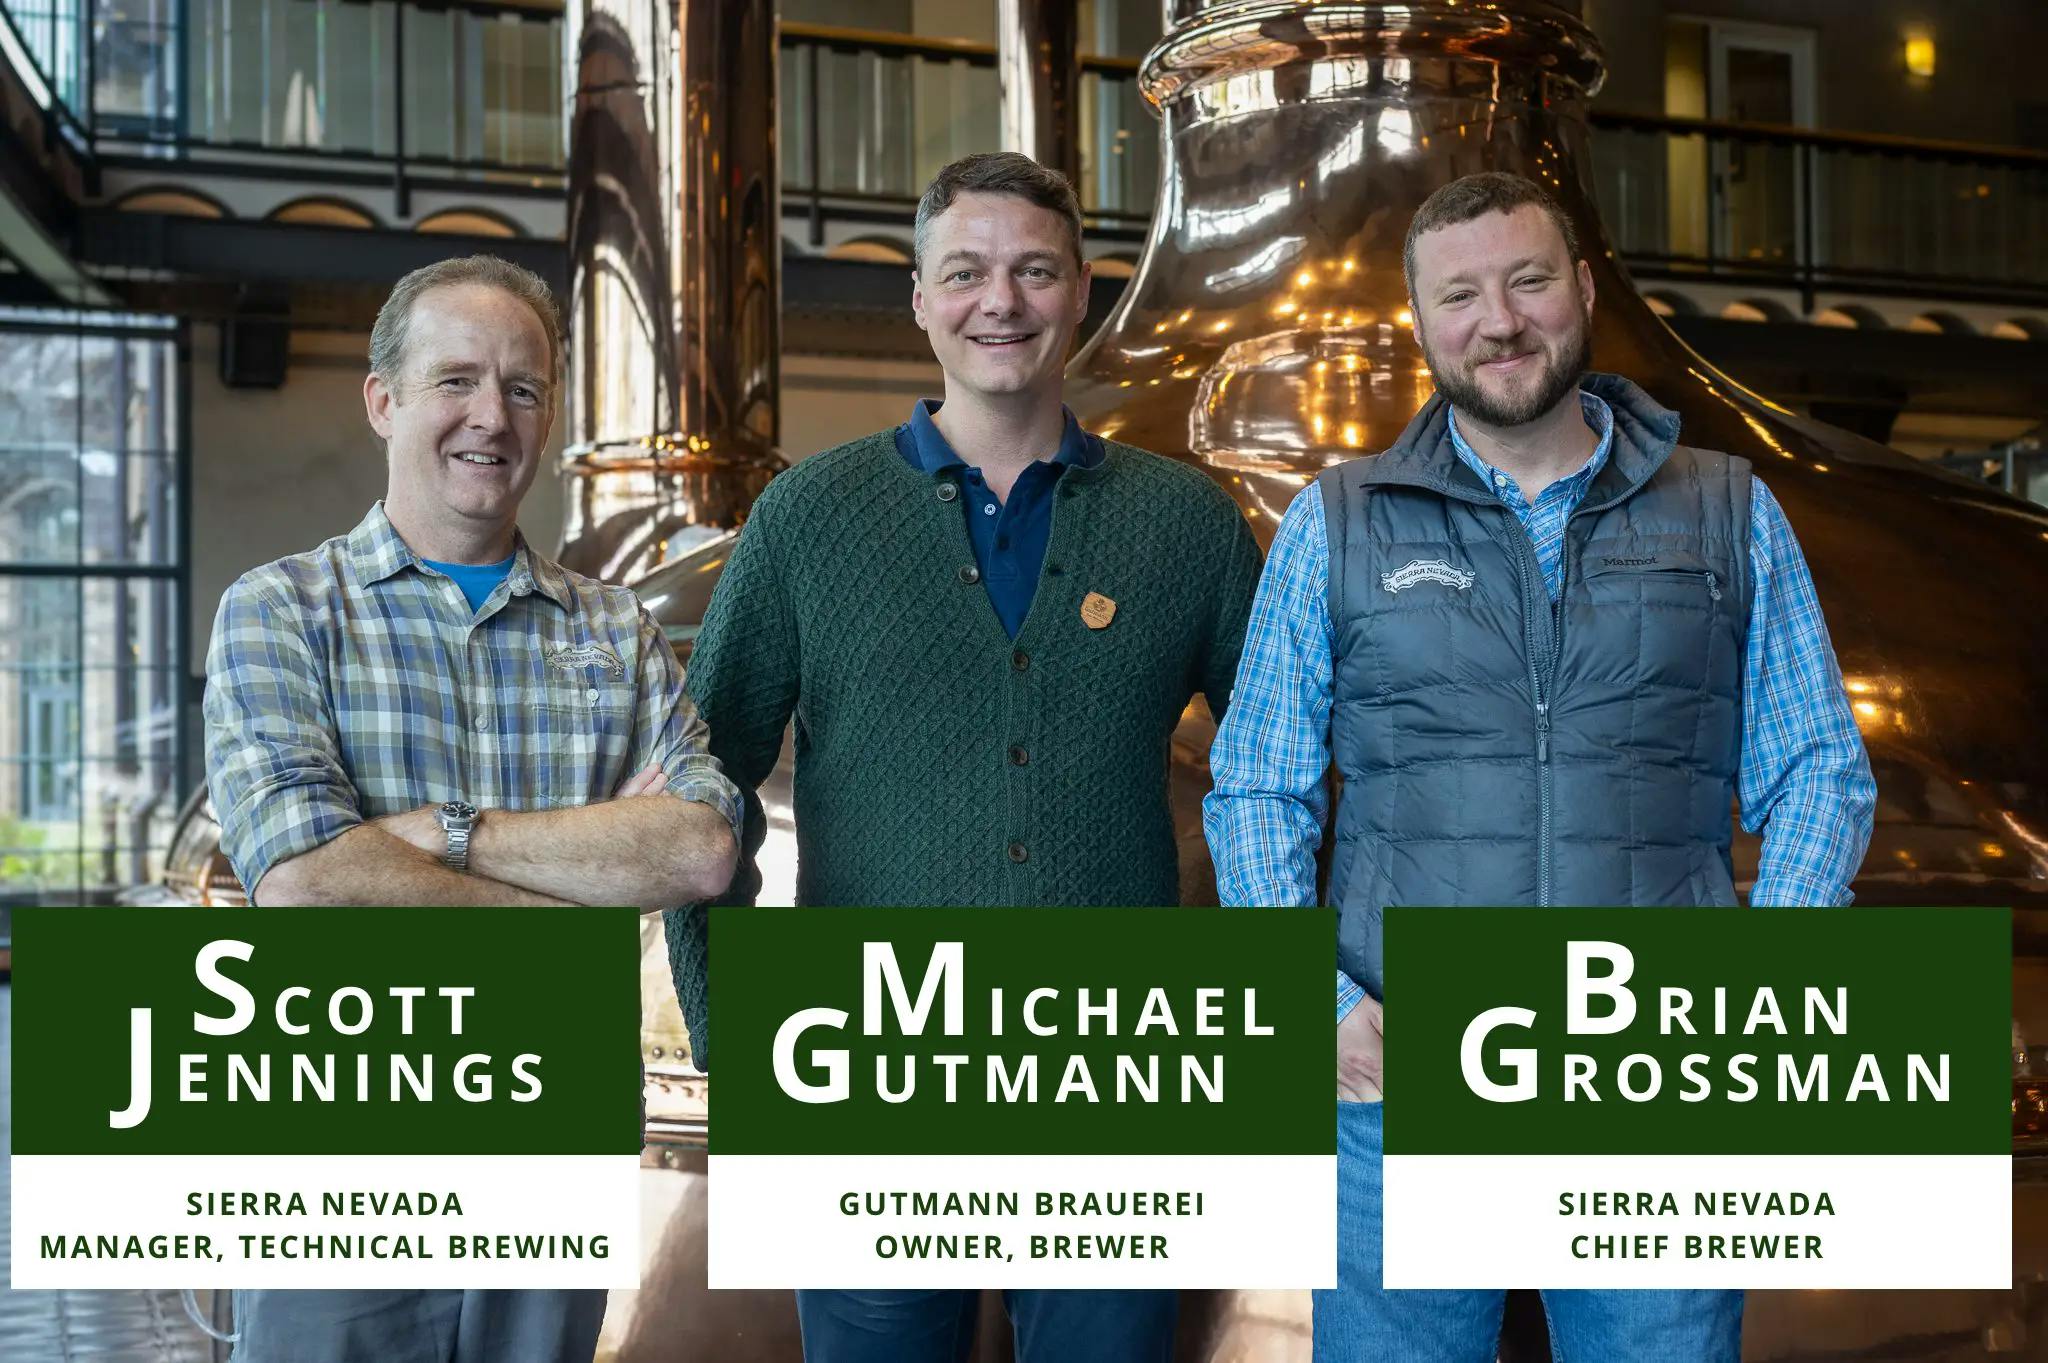 Oktoberfest brewers stand together in brewhouse